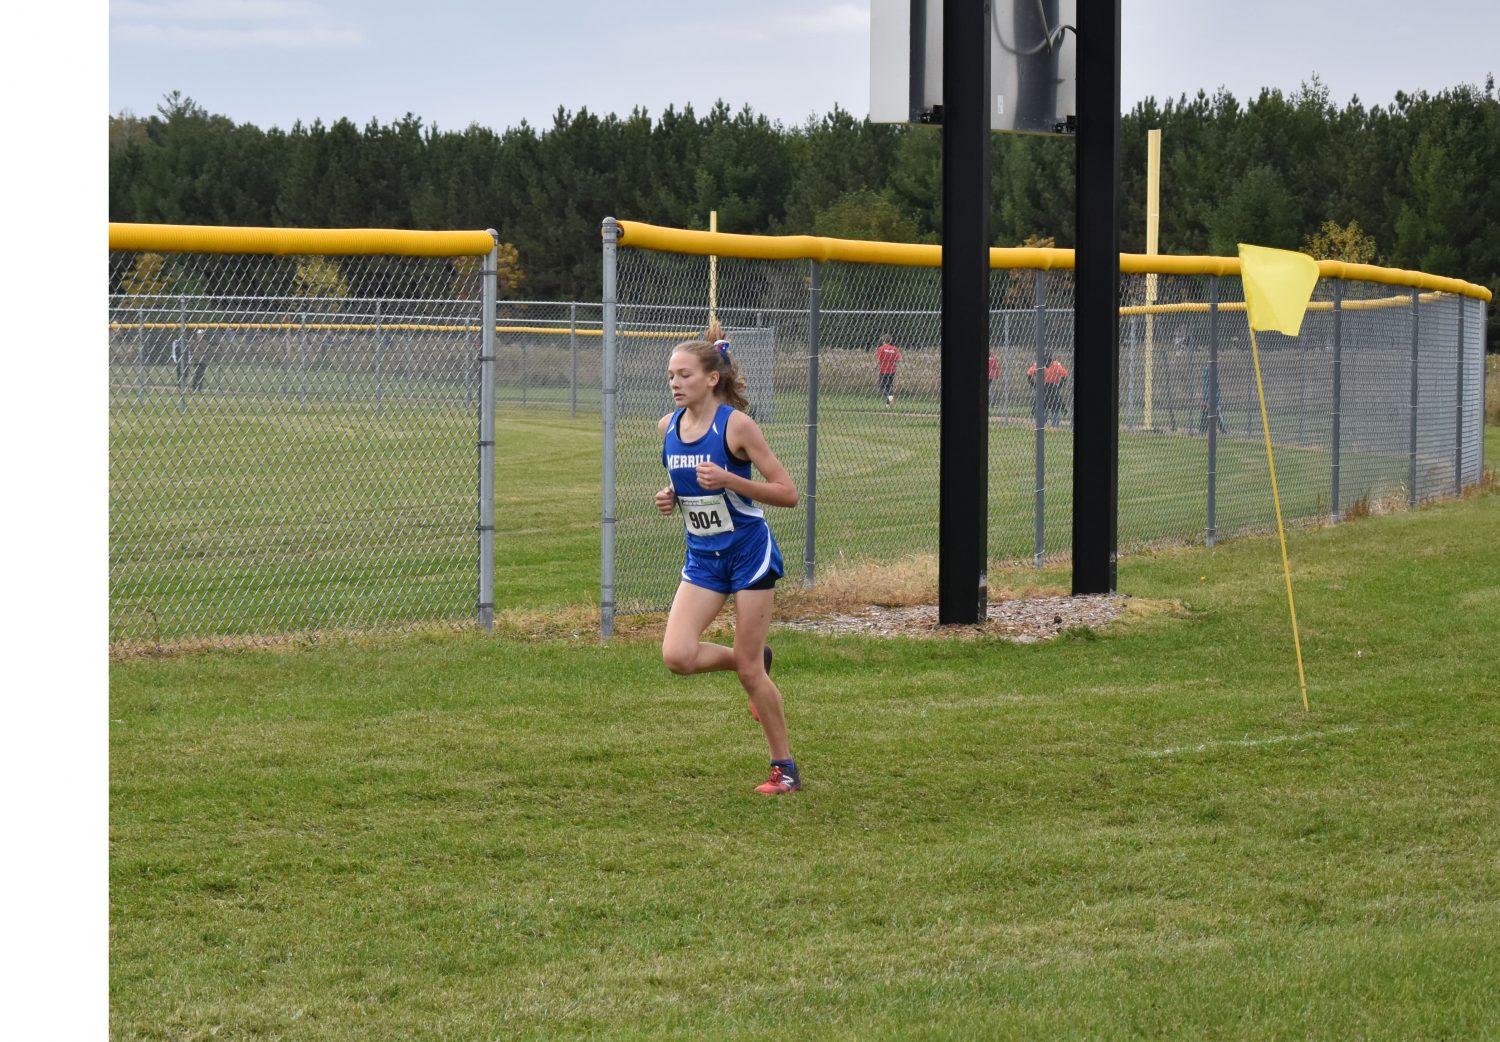 Merrill cross country sends runner to State